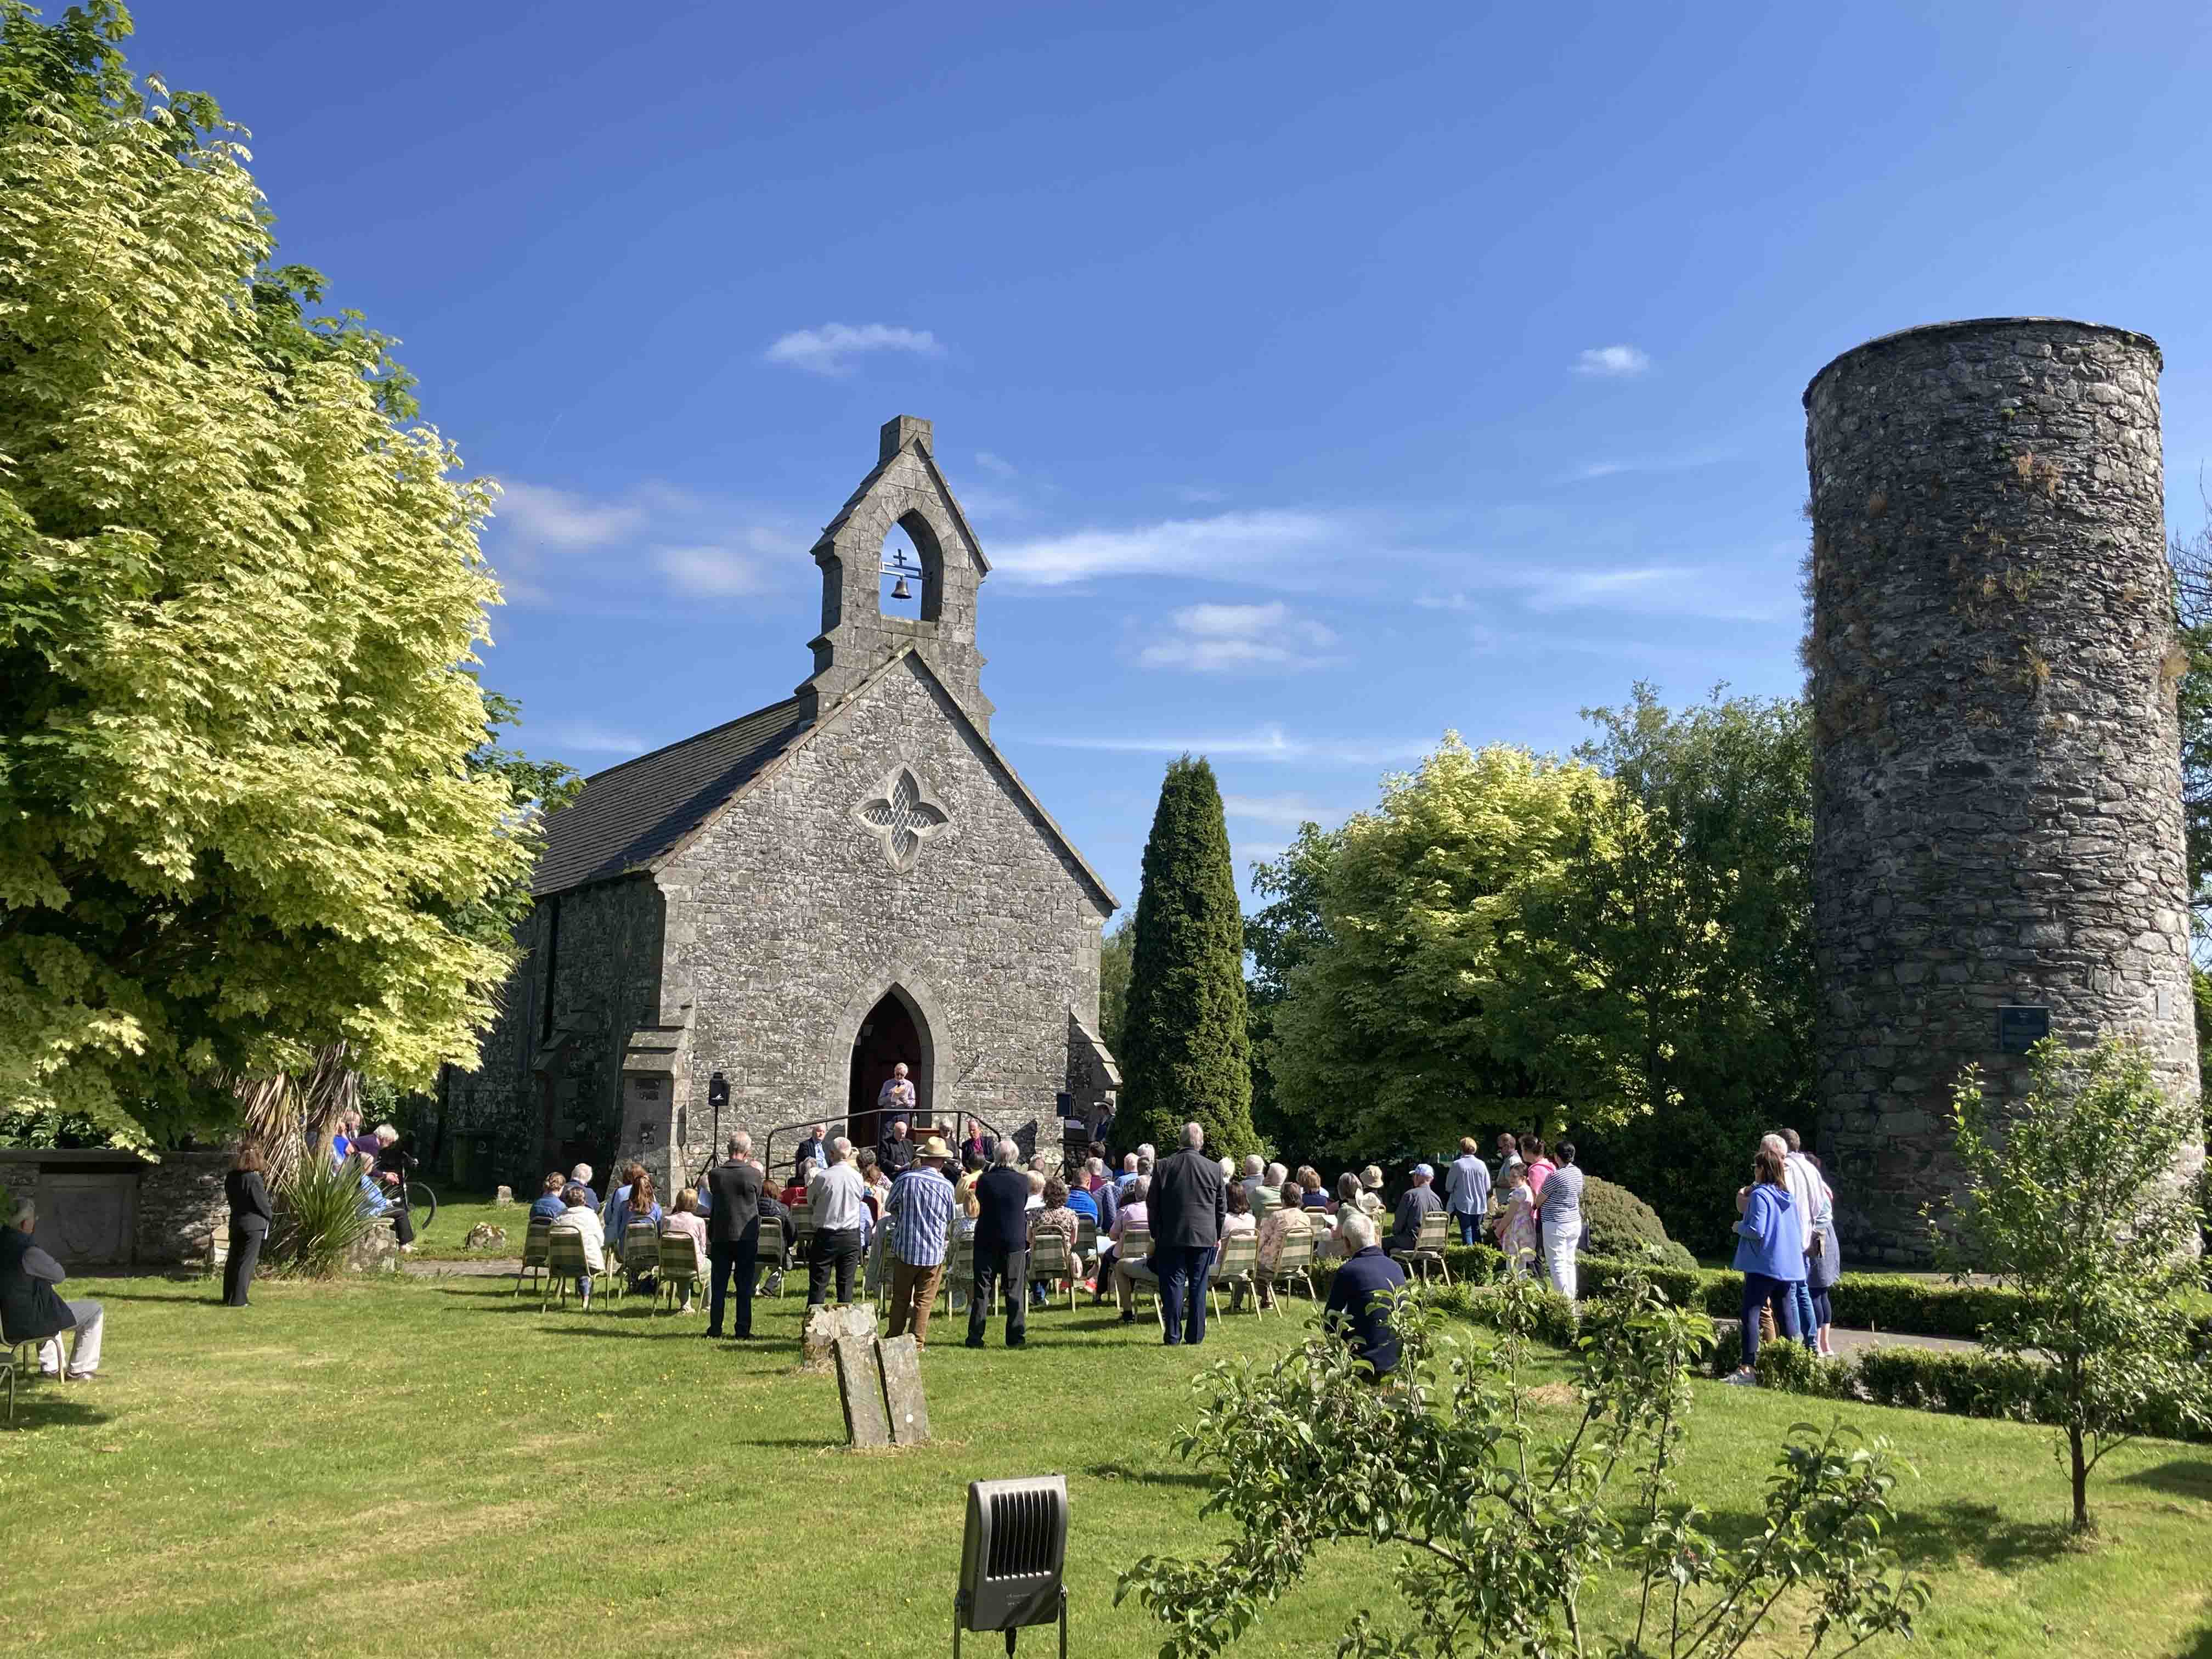 The outdoor ecumenical service which took place on Pentecost Sunday at Inniskeen.